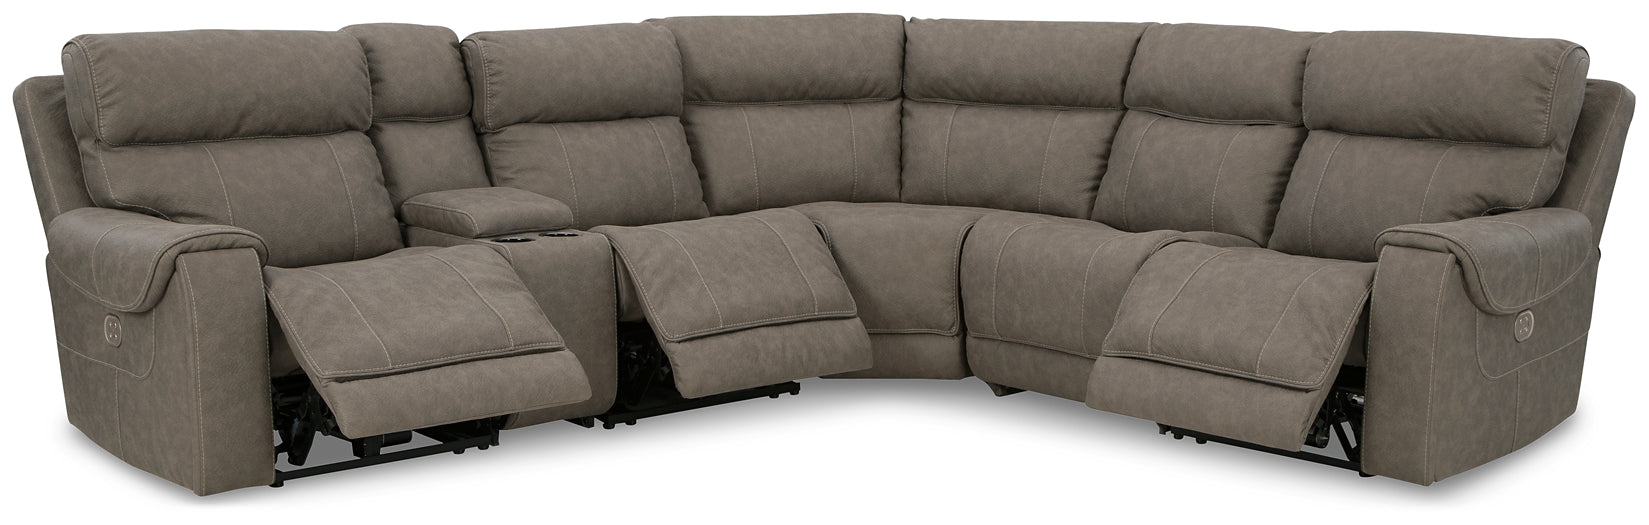 Starbot 6-Piece Power Reclining Sectional JB's Furniture  Home Furniture, Home Decor, Furniture Store